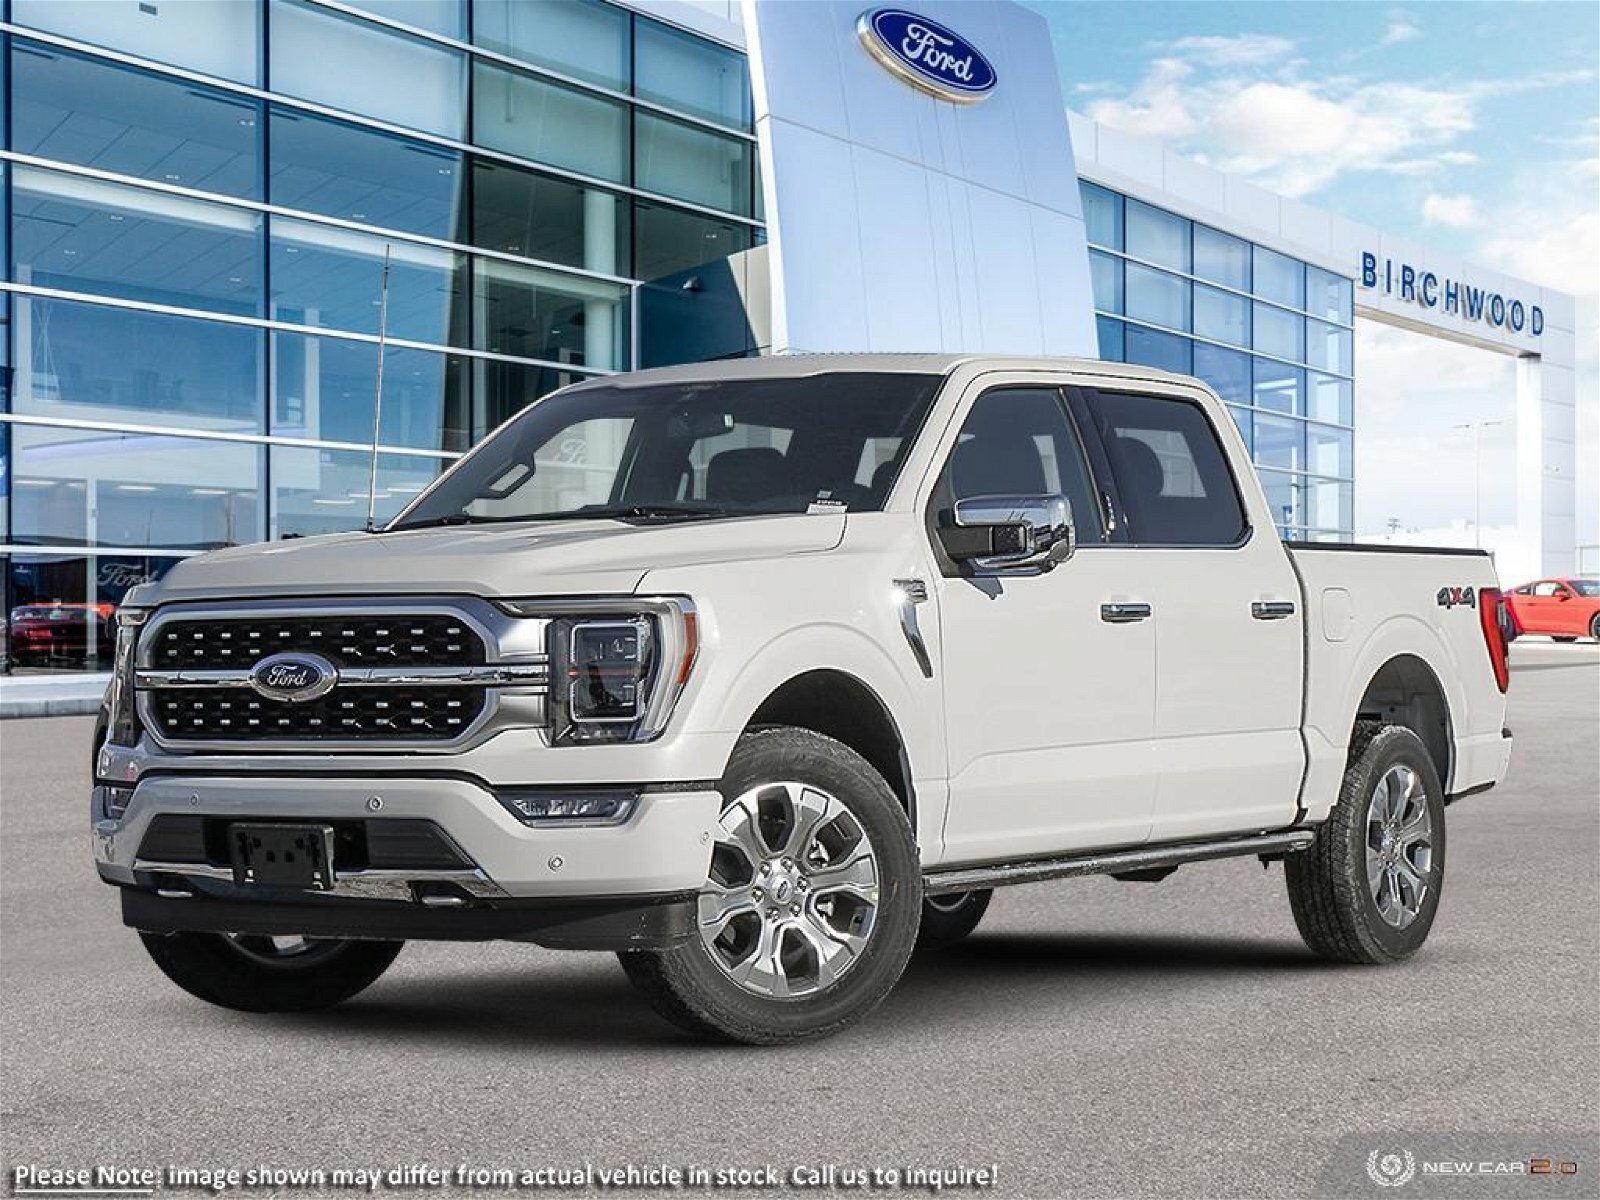 2023 Ford F-150 Platinum CLEAROUT - $17243 OFF